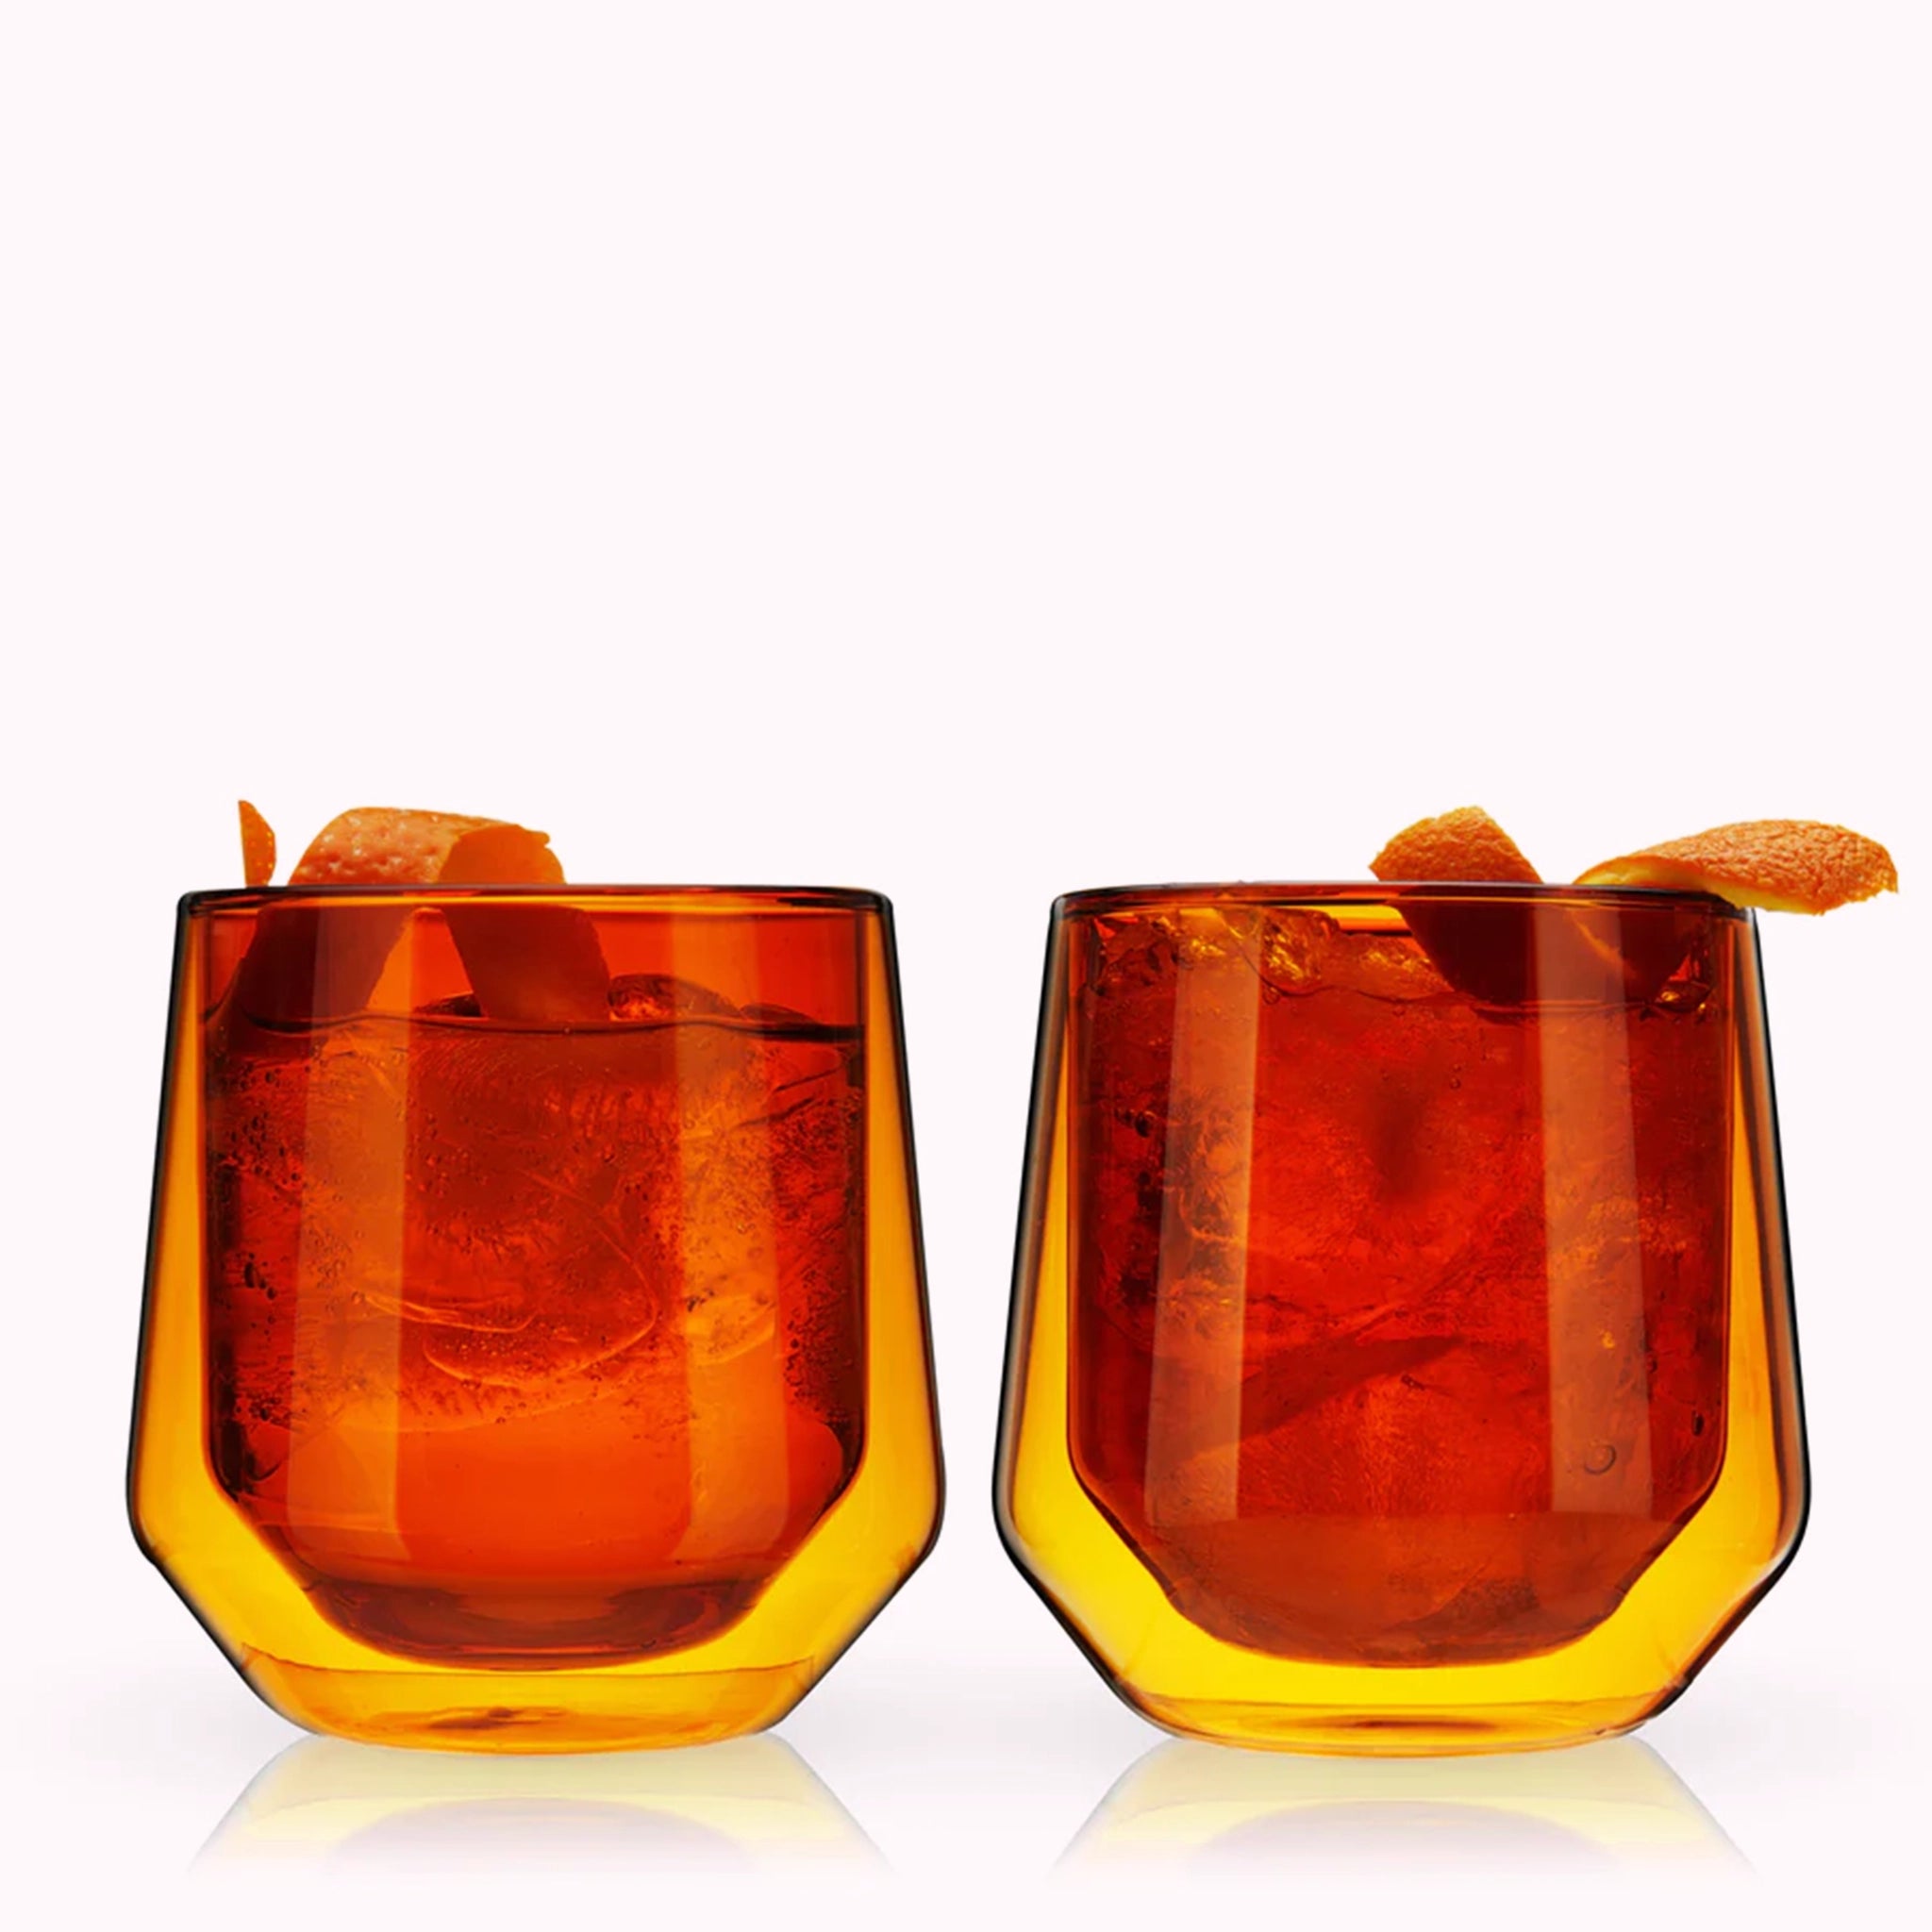 A set of two double walled glass tumblers in a vibrant amber color photographed here in front of a white background with orange peel garnishes.